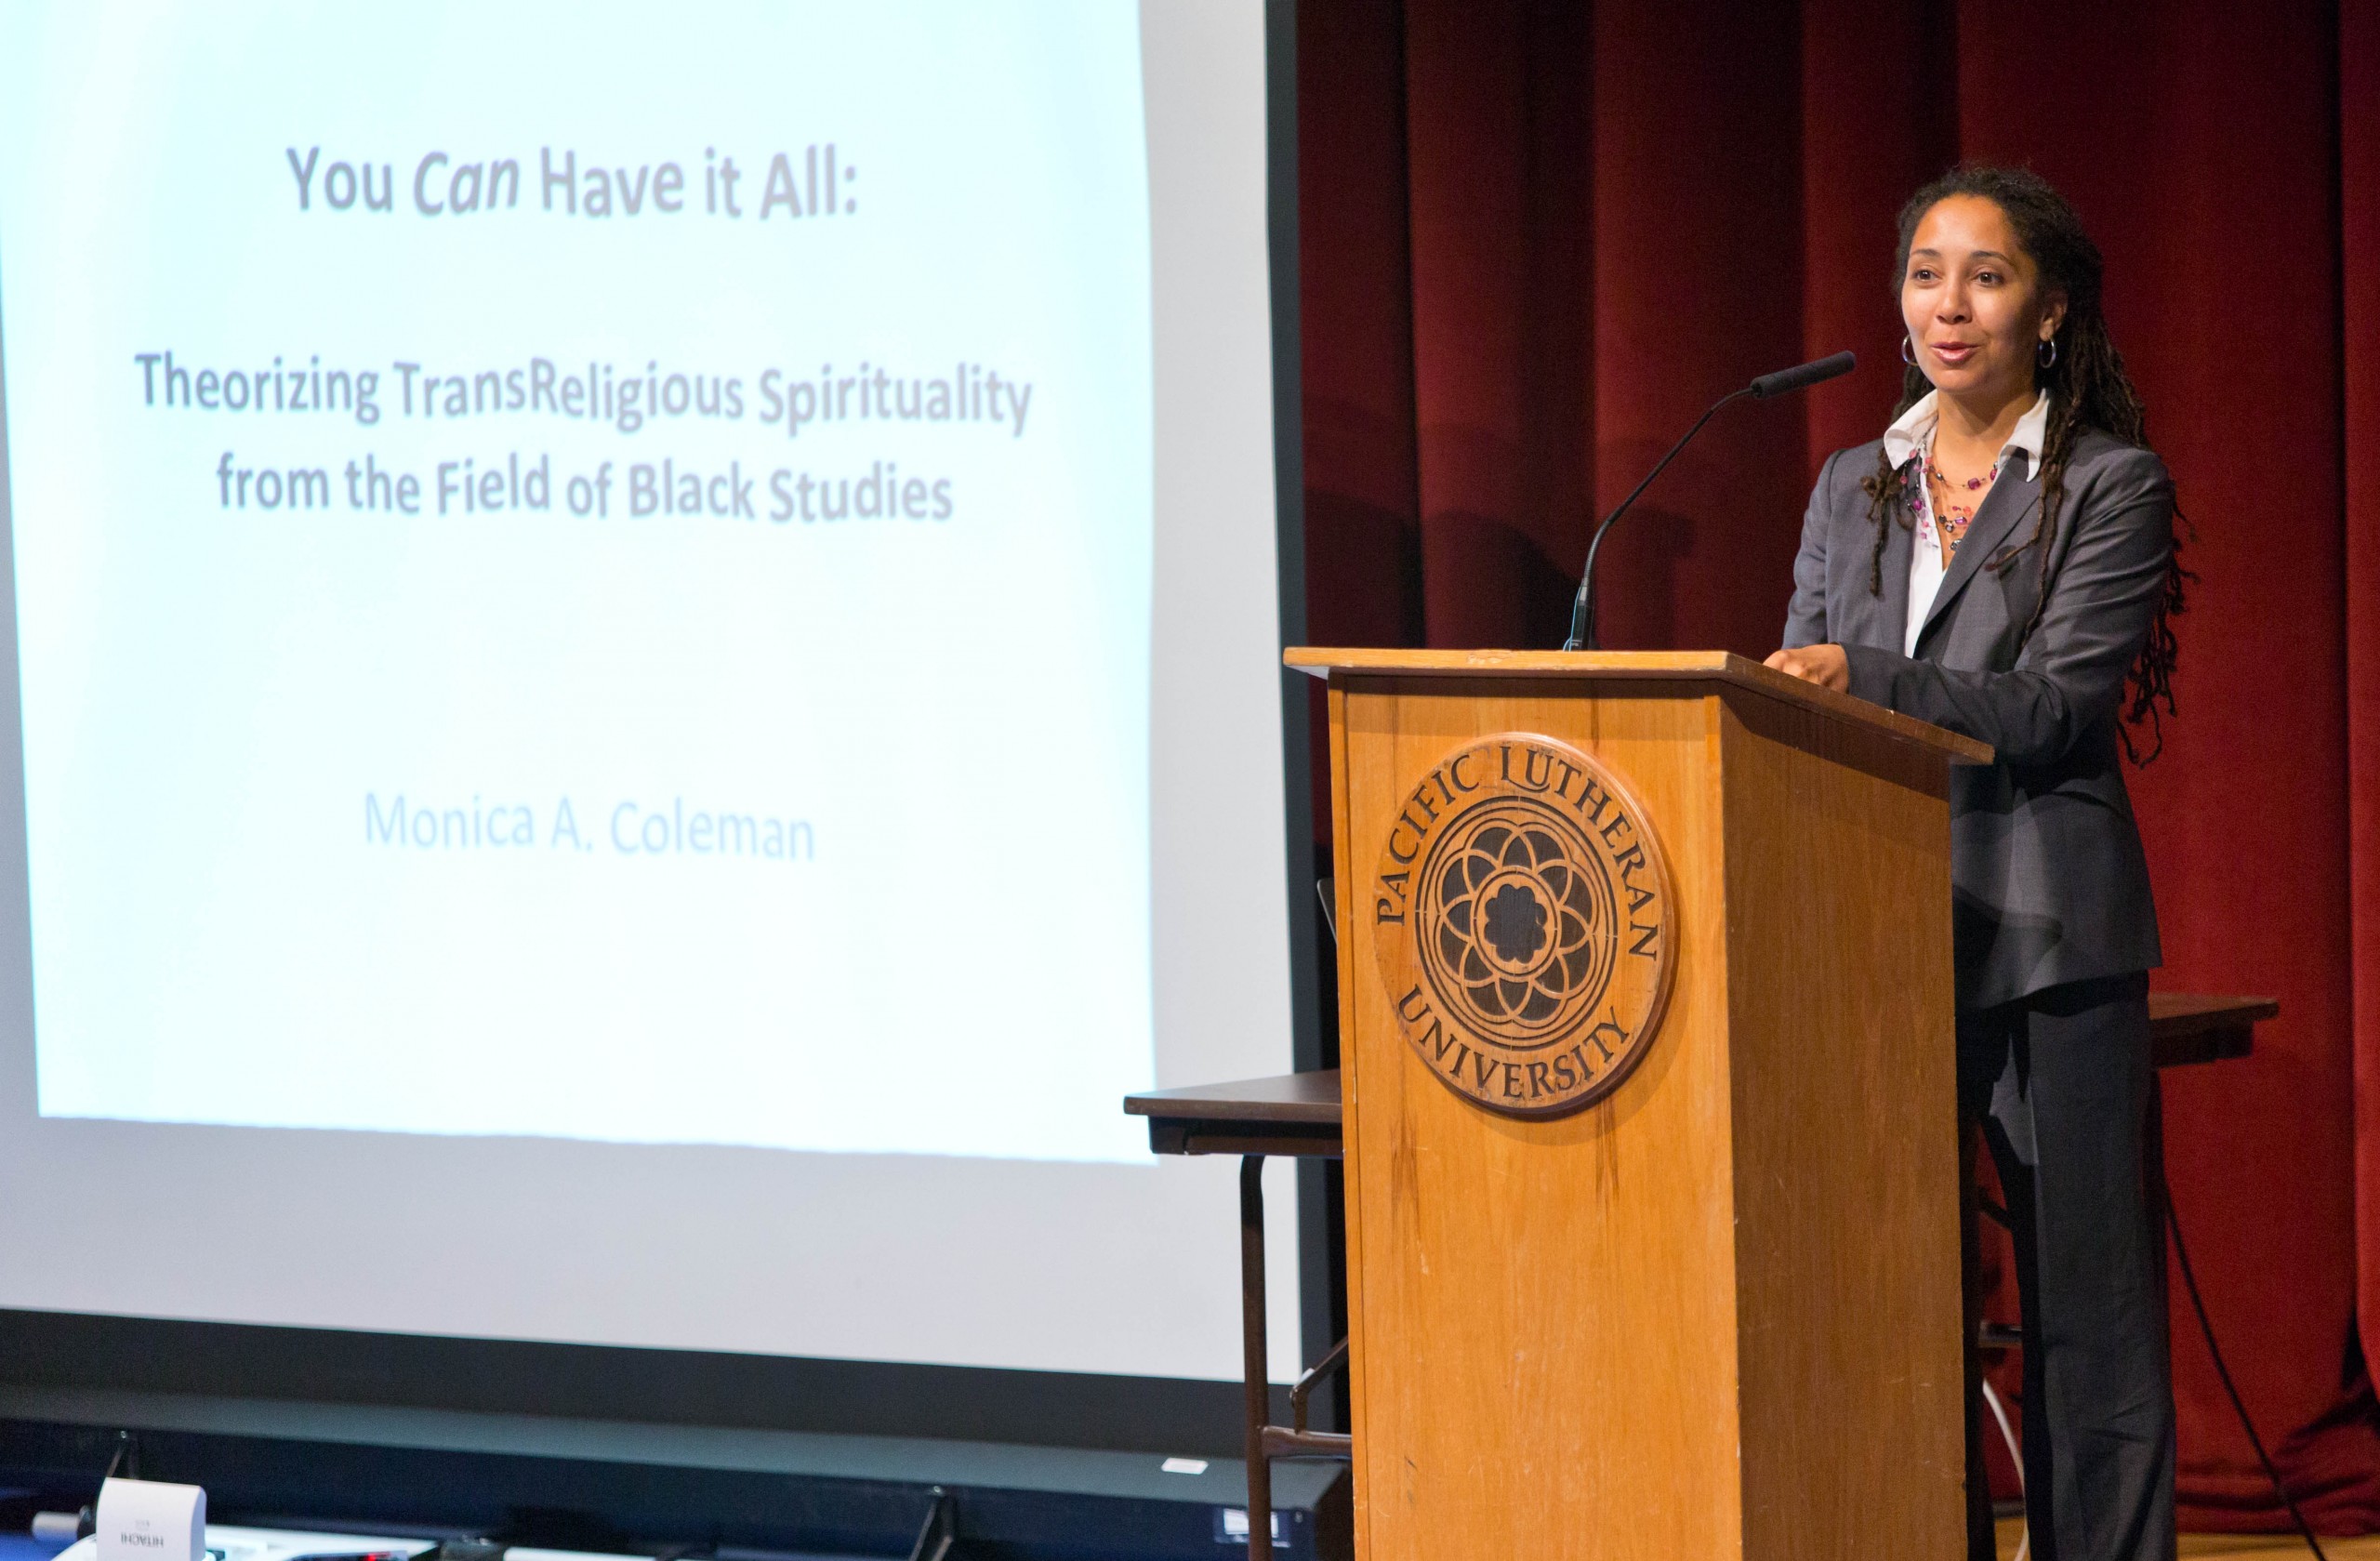 Rev. Monica Coleman, Claremont School of theology, delivers the Knutson Lecture at PLU on Wednesday, Oct. 22, 2014. (PLU Photo/John Froschauer)